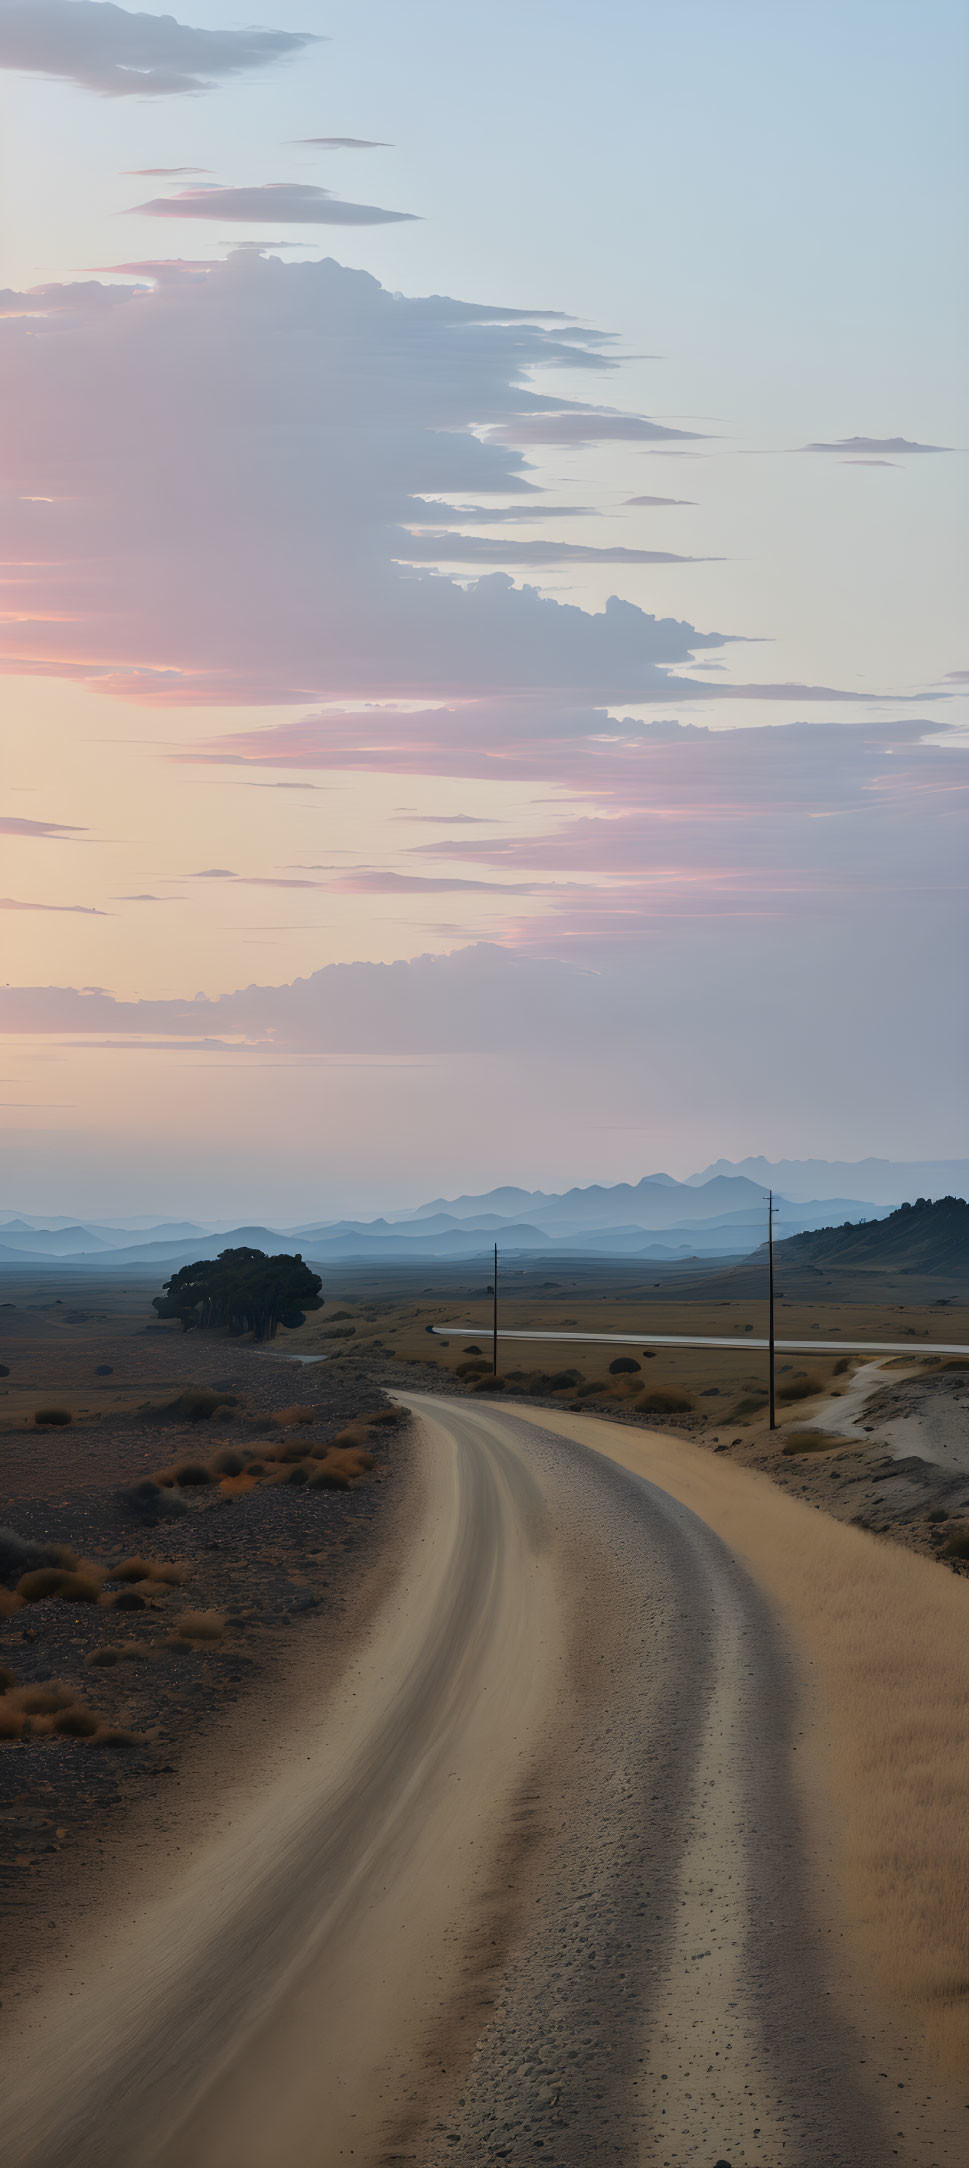 A road to the sunset